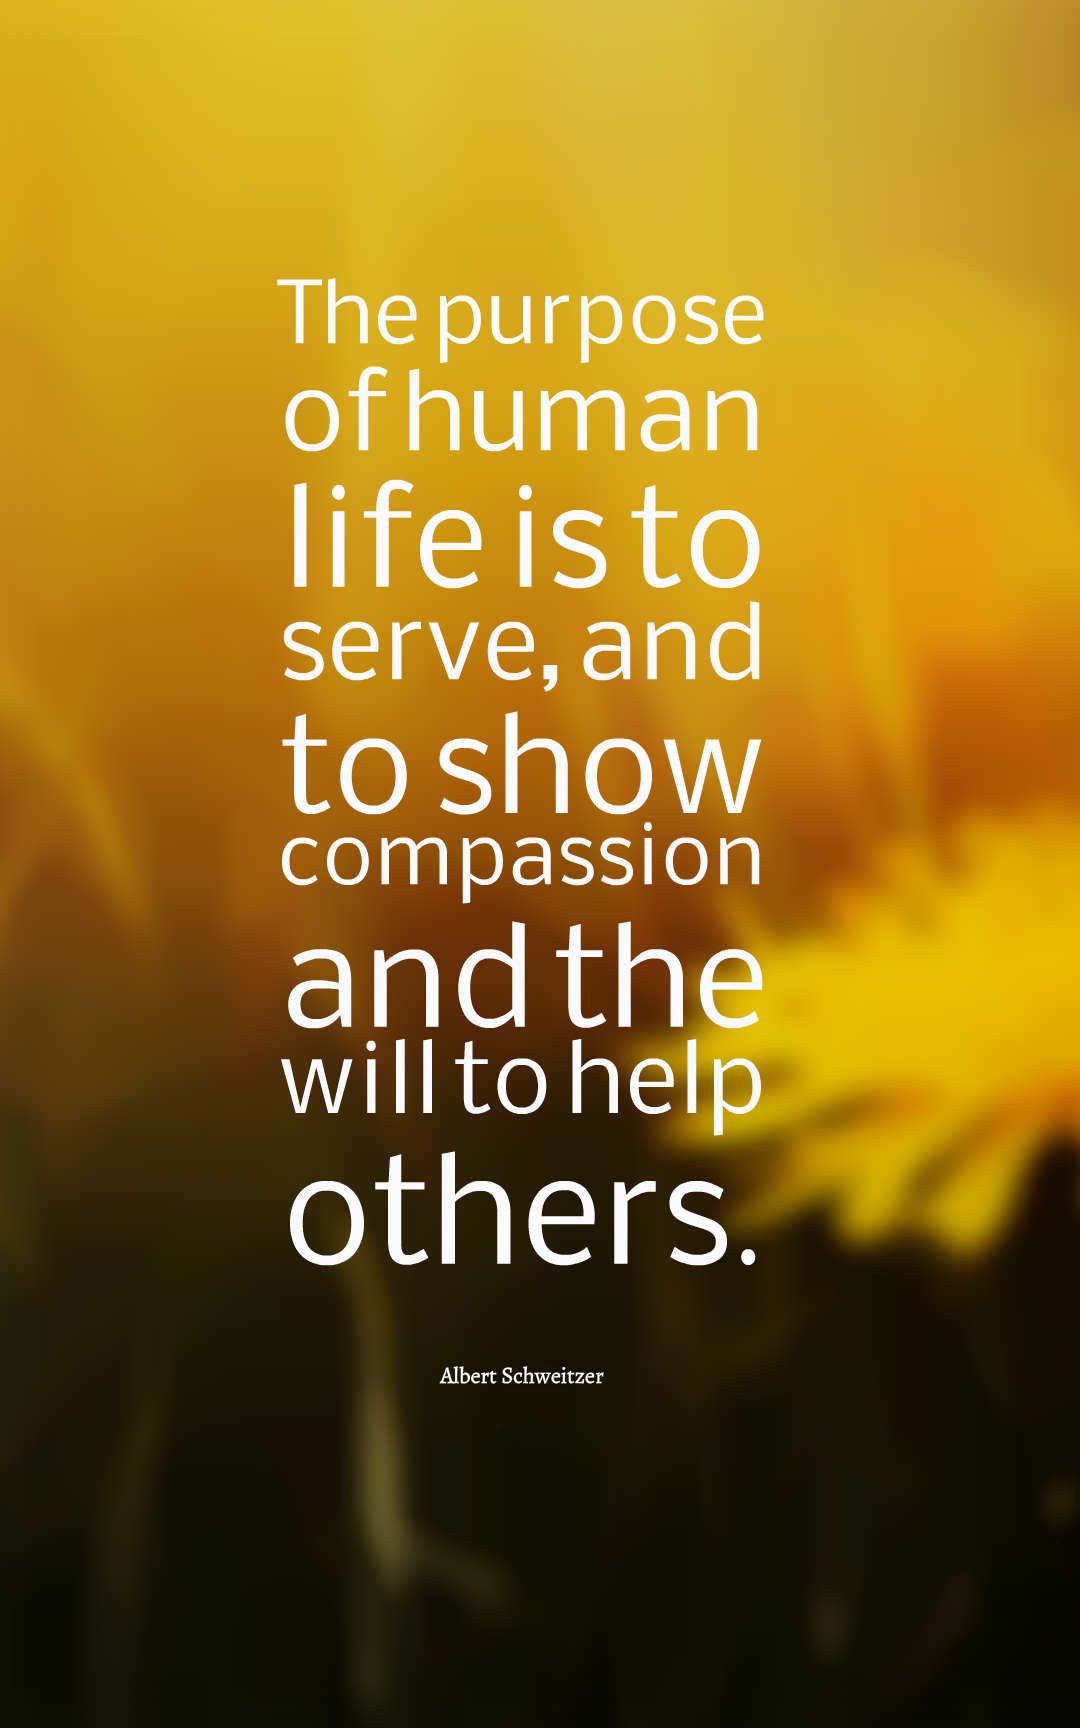 The purpose of human life is to serve, and to show compassion and the will to help others.